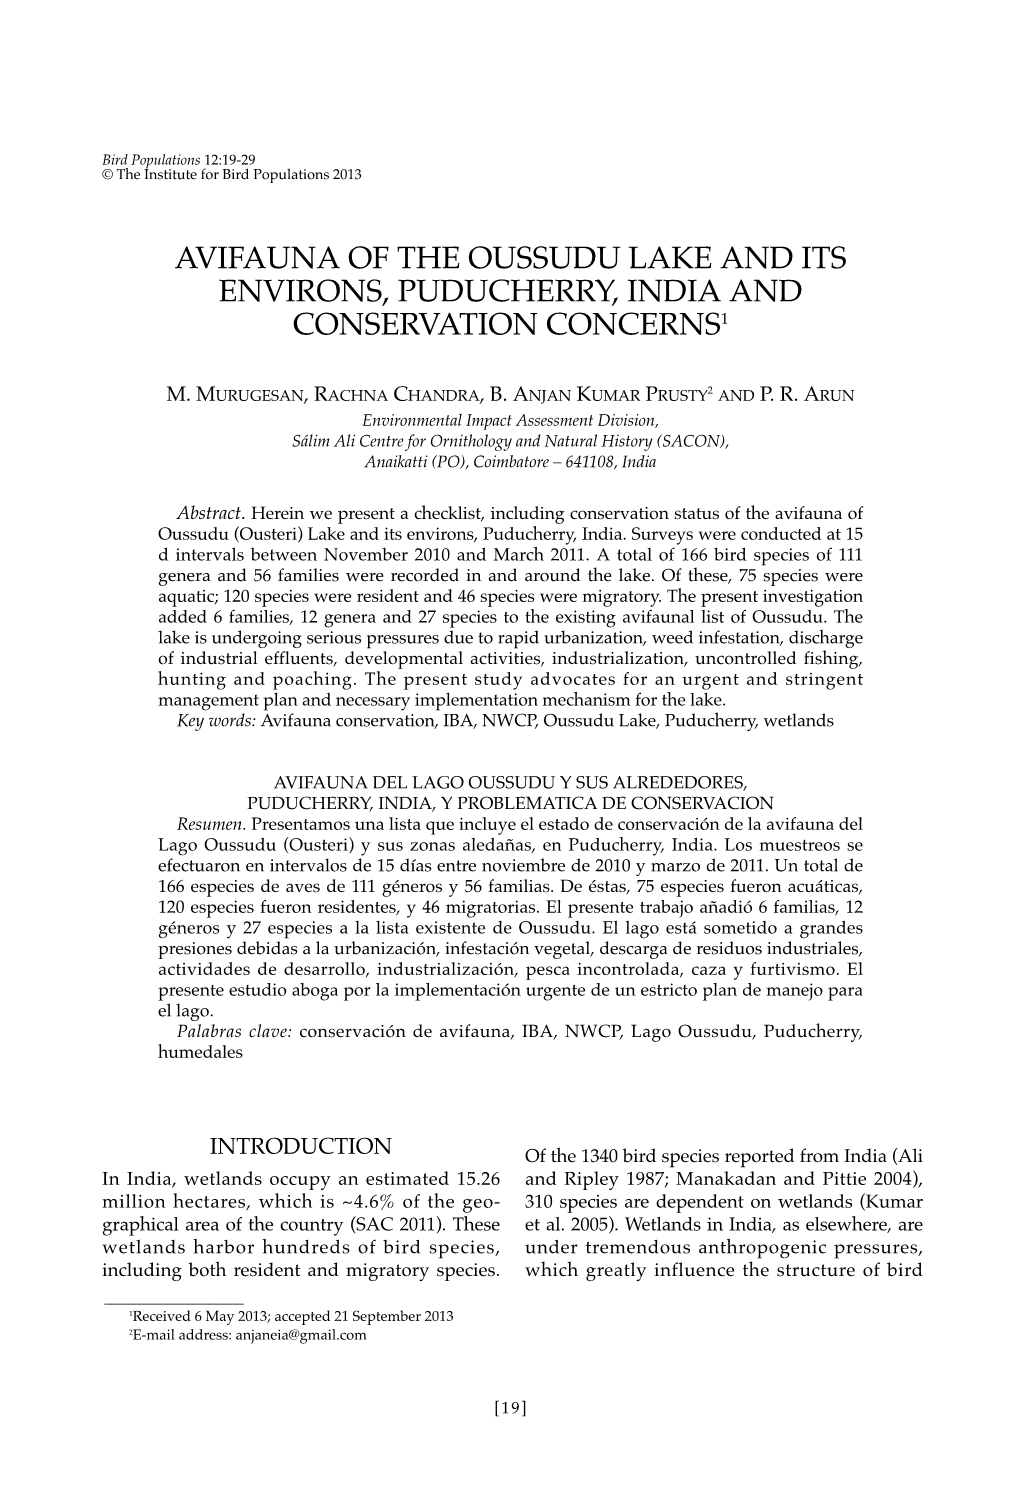 Avifauna of the Oussudu Lake and Its Environs, Puducherry, India and Conservation Concerns1